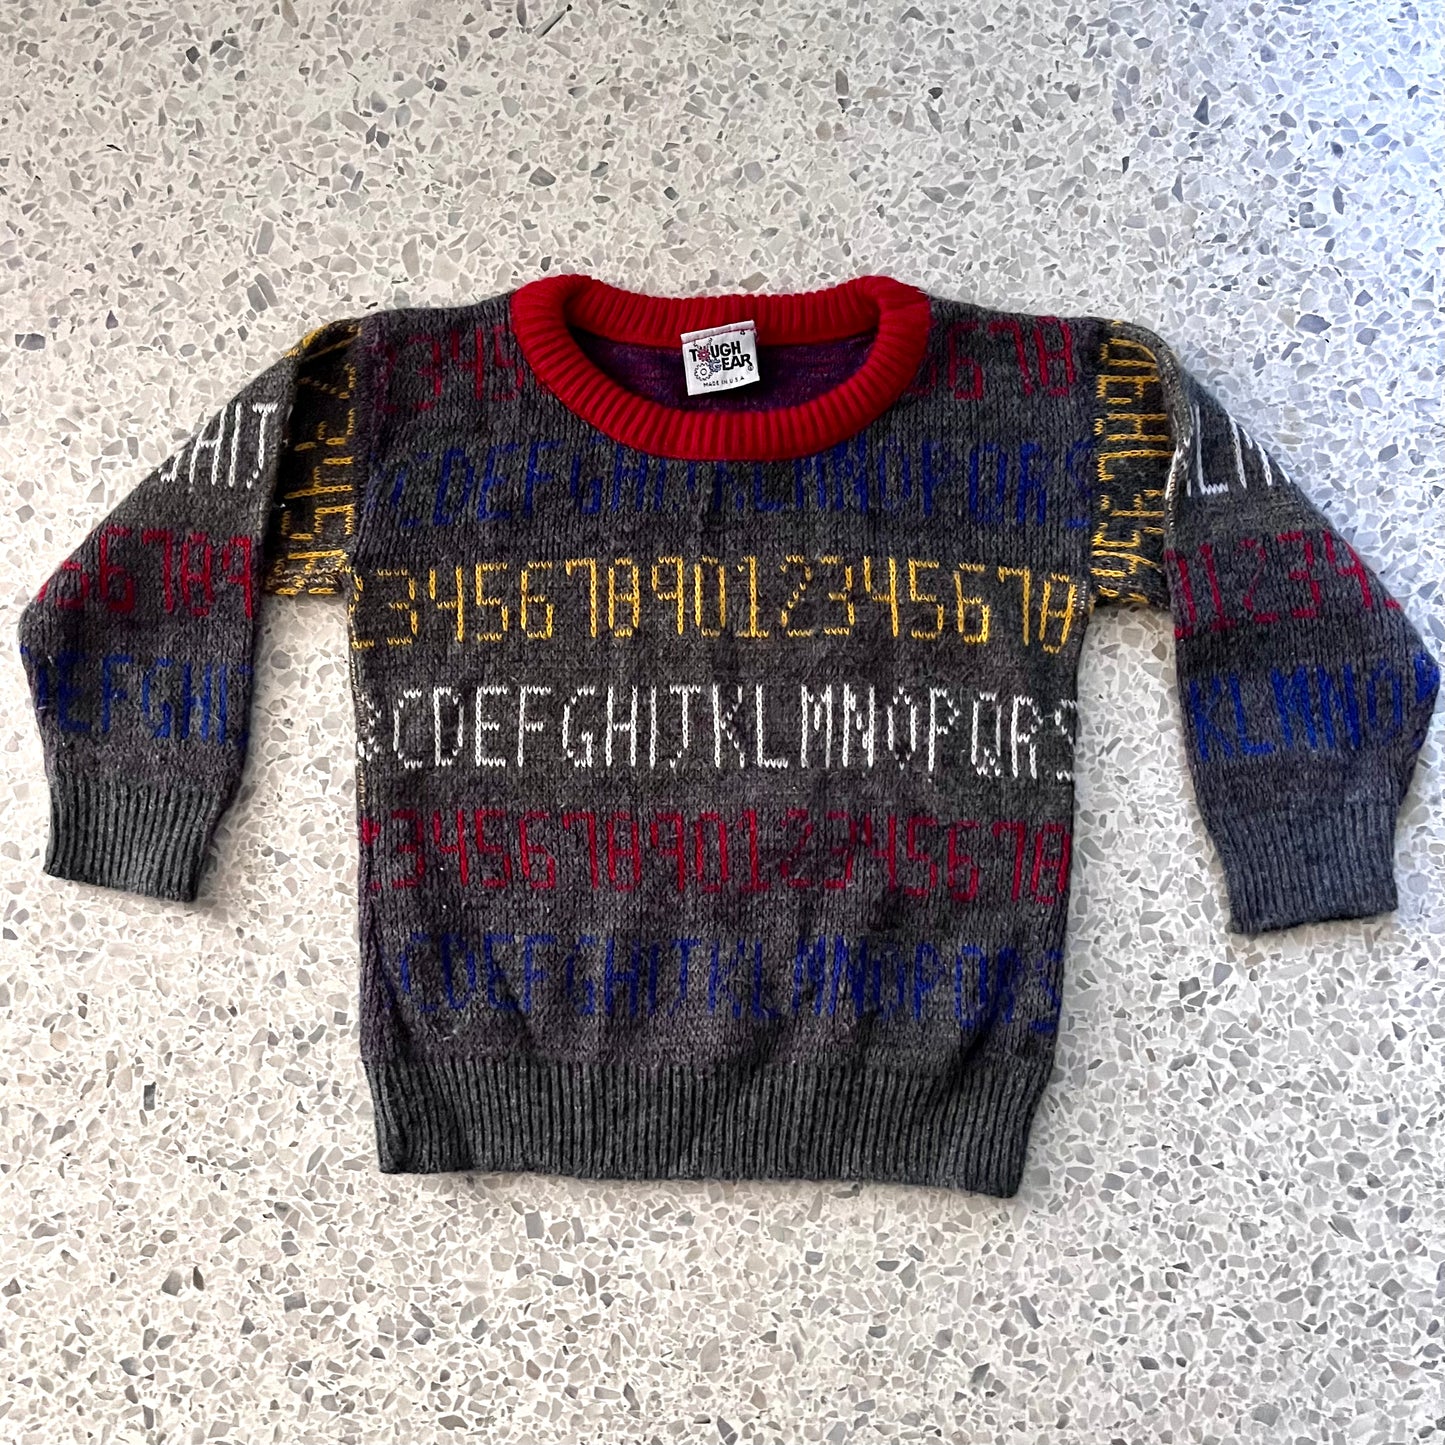 Late 80s/ Early 90s Tough Gear Sweater